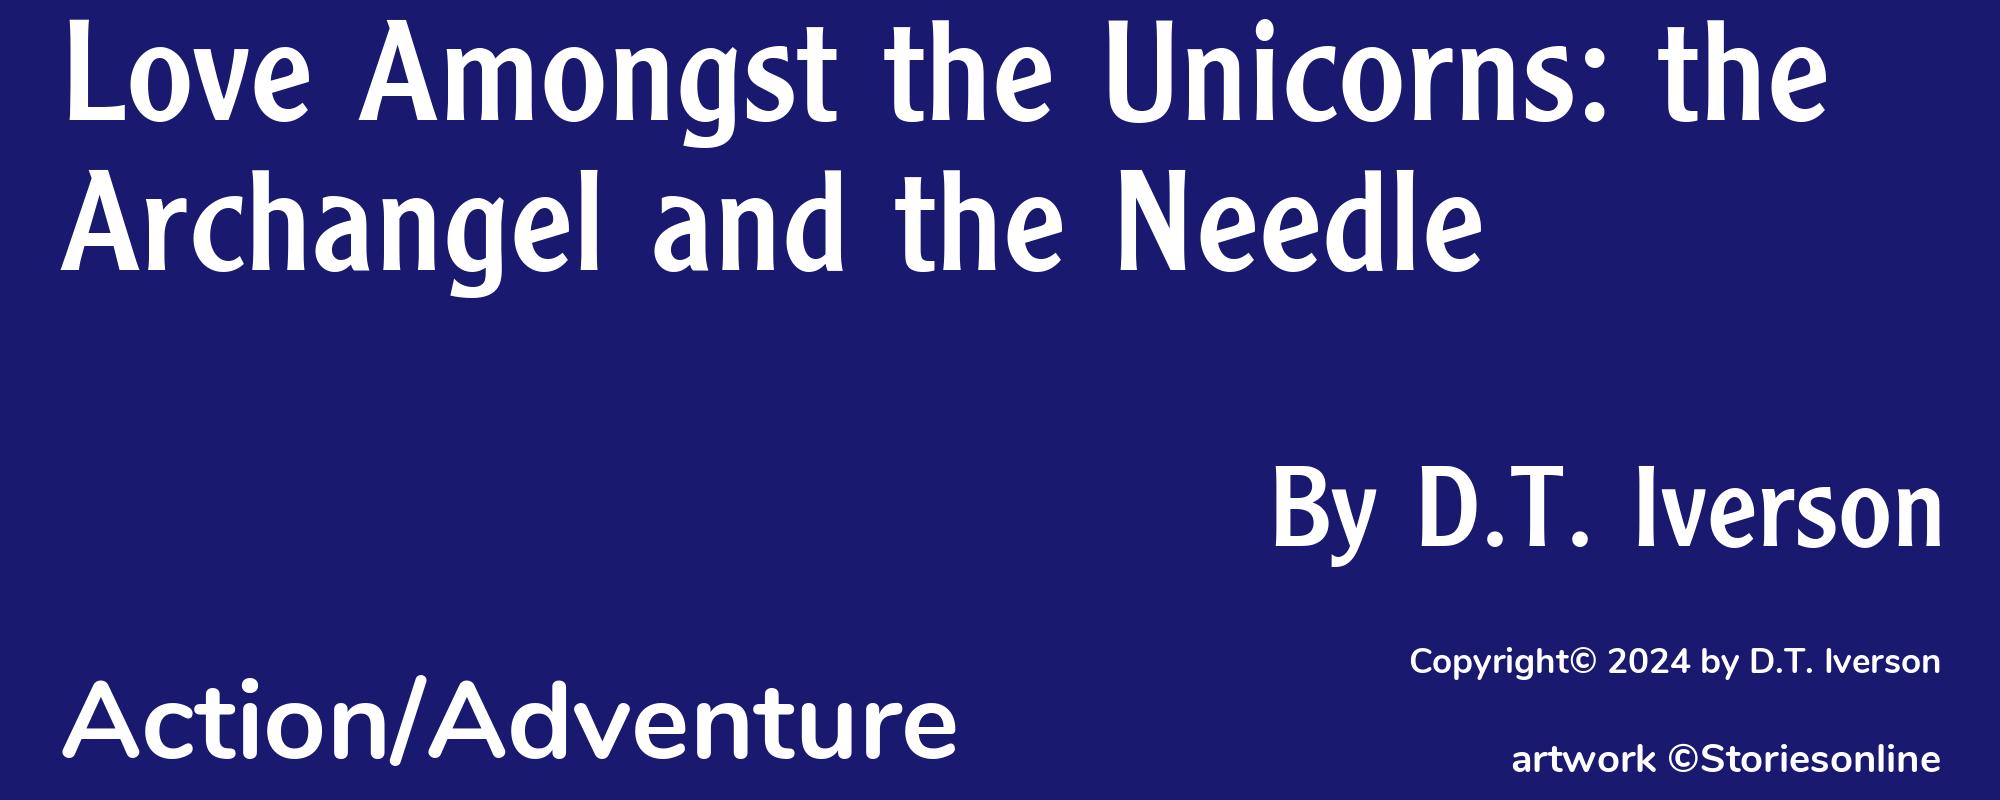 Love Amongst the Unicorns: the Archangel and the Needle - Cover